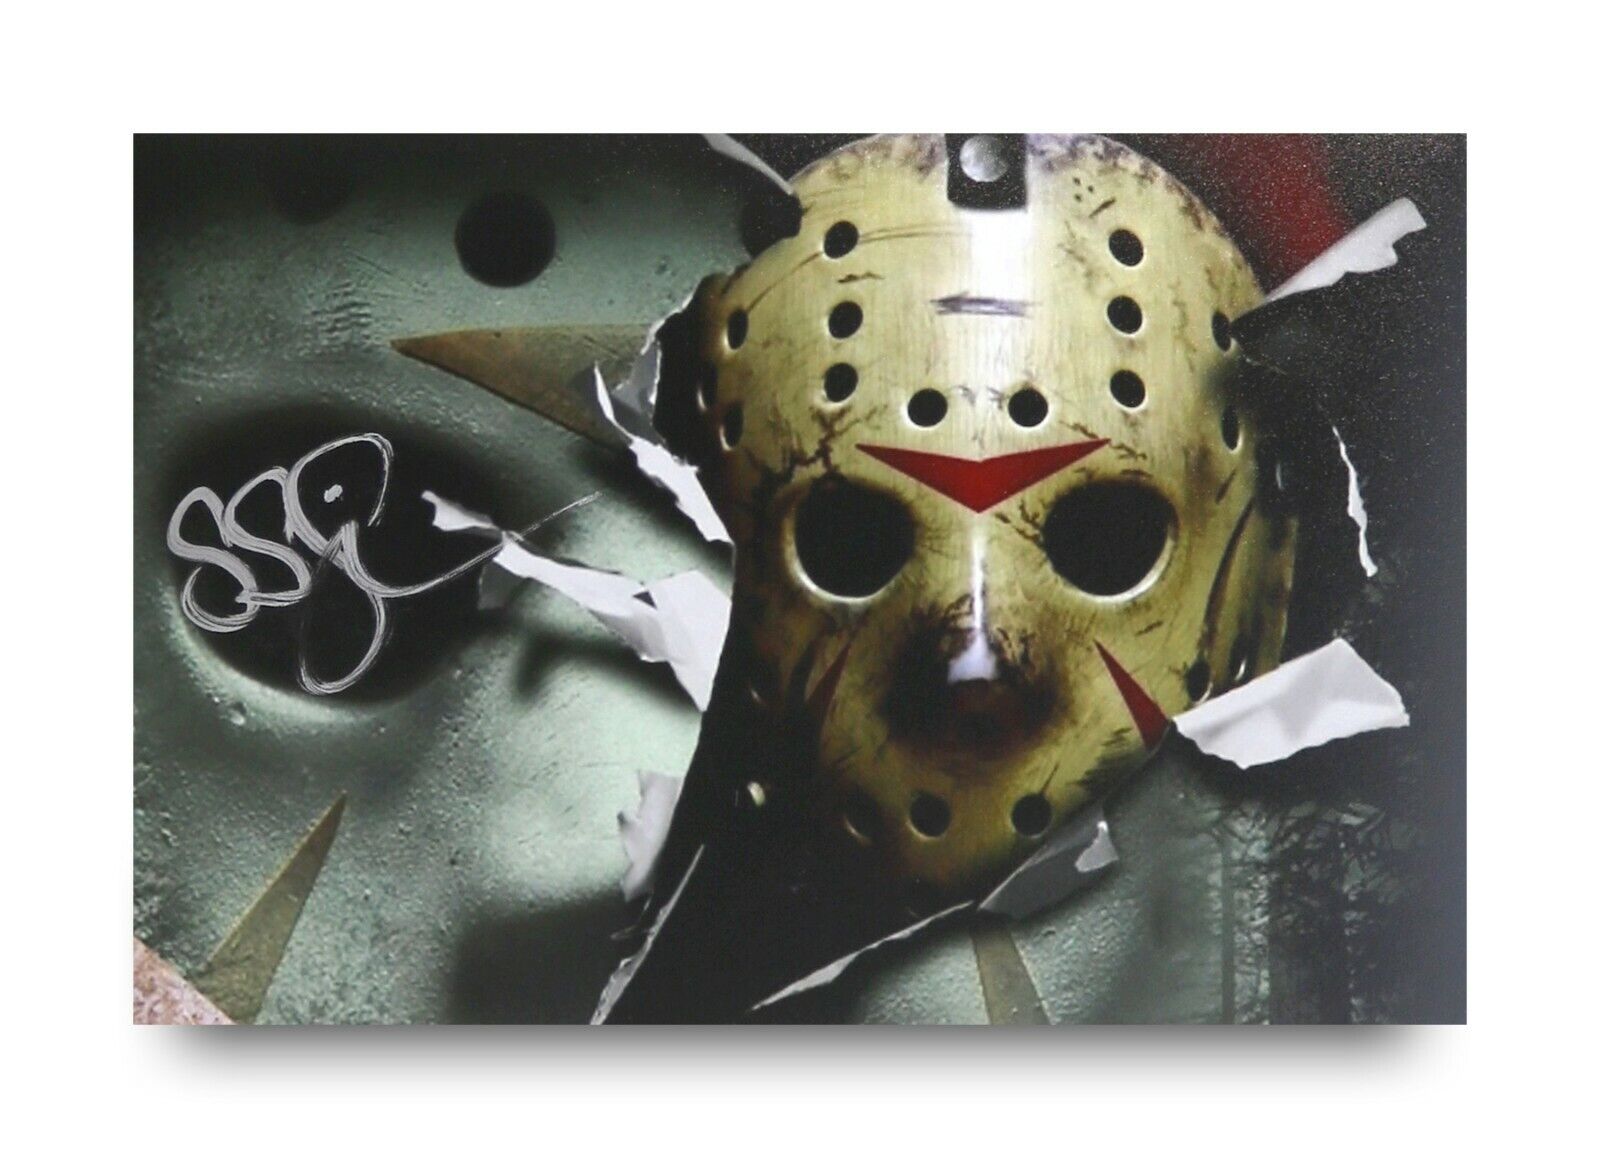 Sean S. Cunningham Signed 6x4 Photo Poster painting Friday The 13th Jason Genuine Autograph +COA